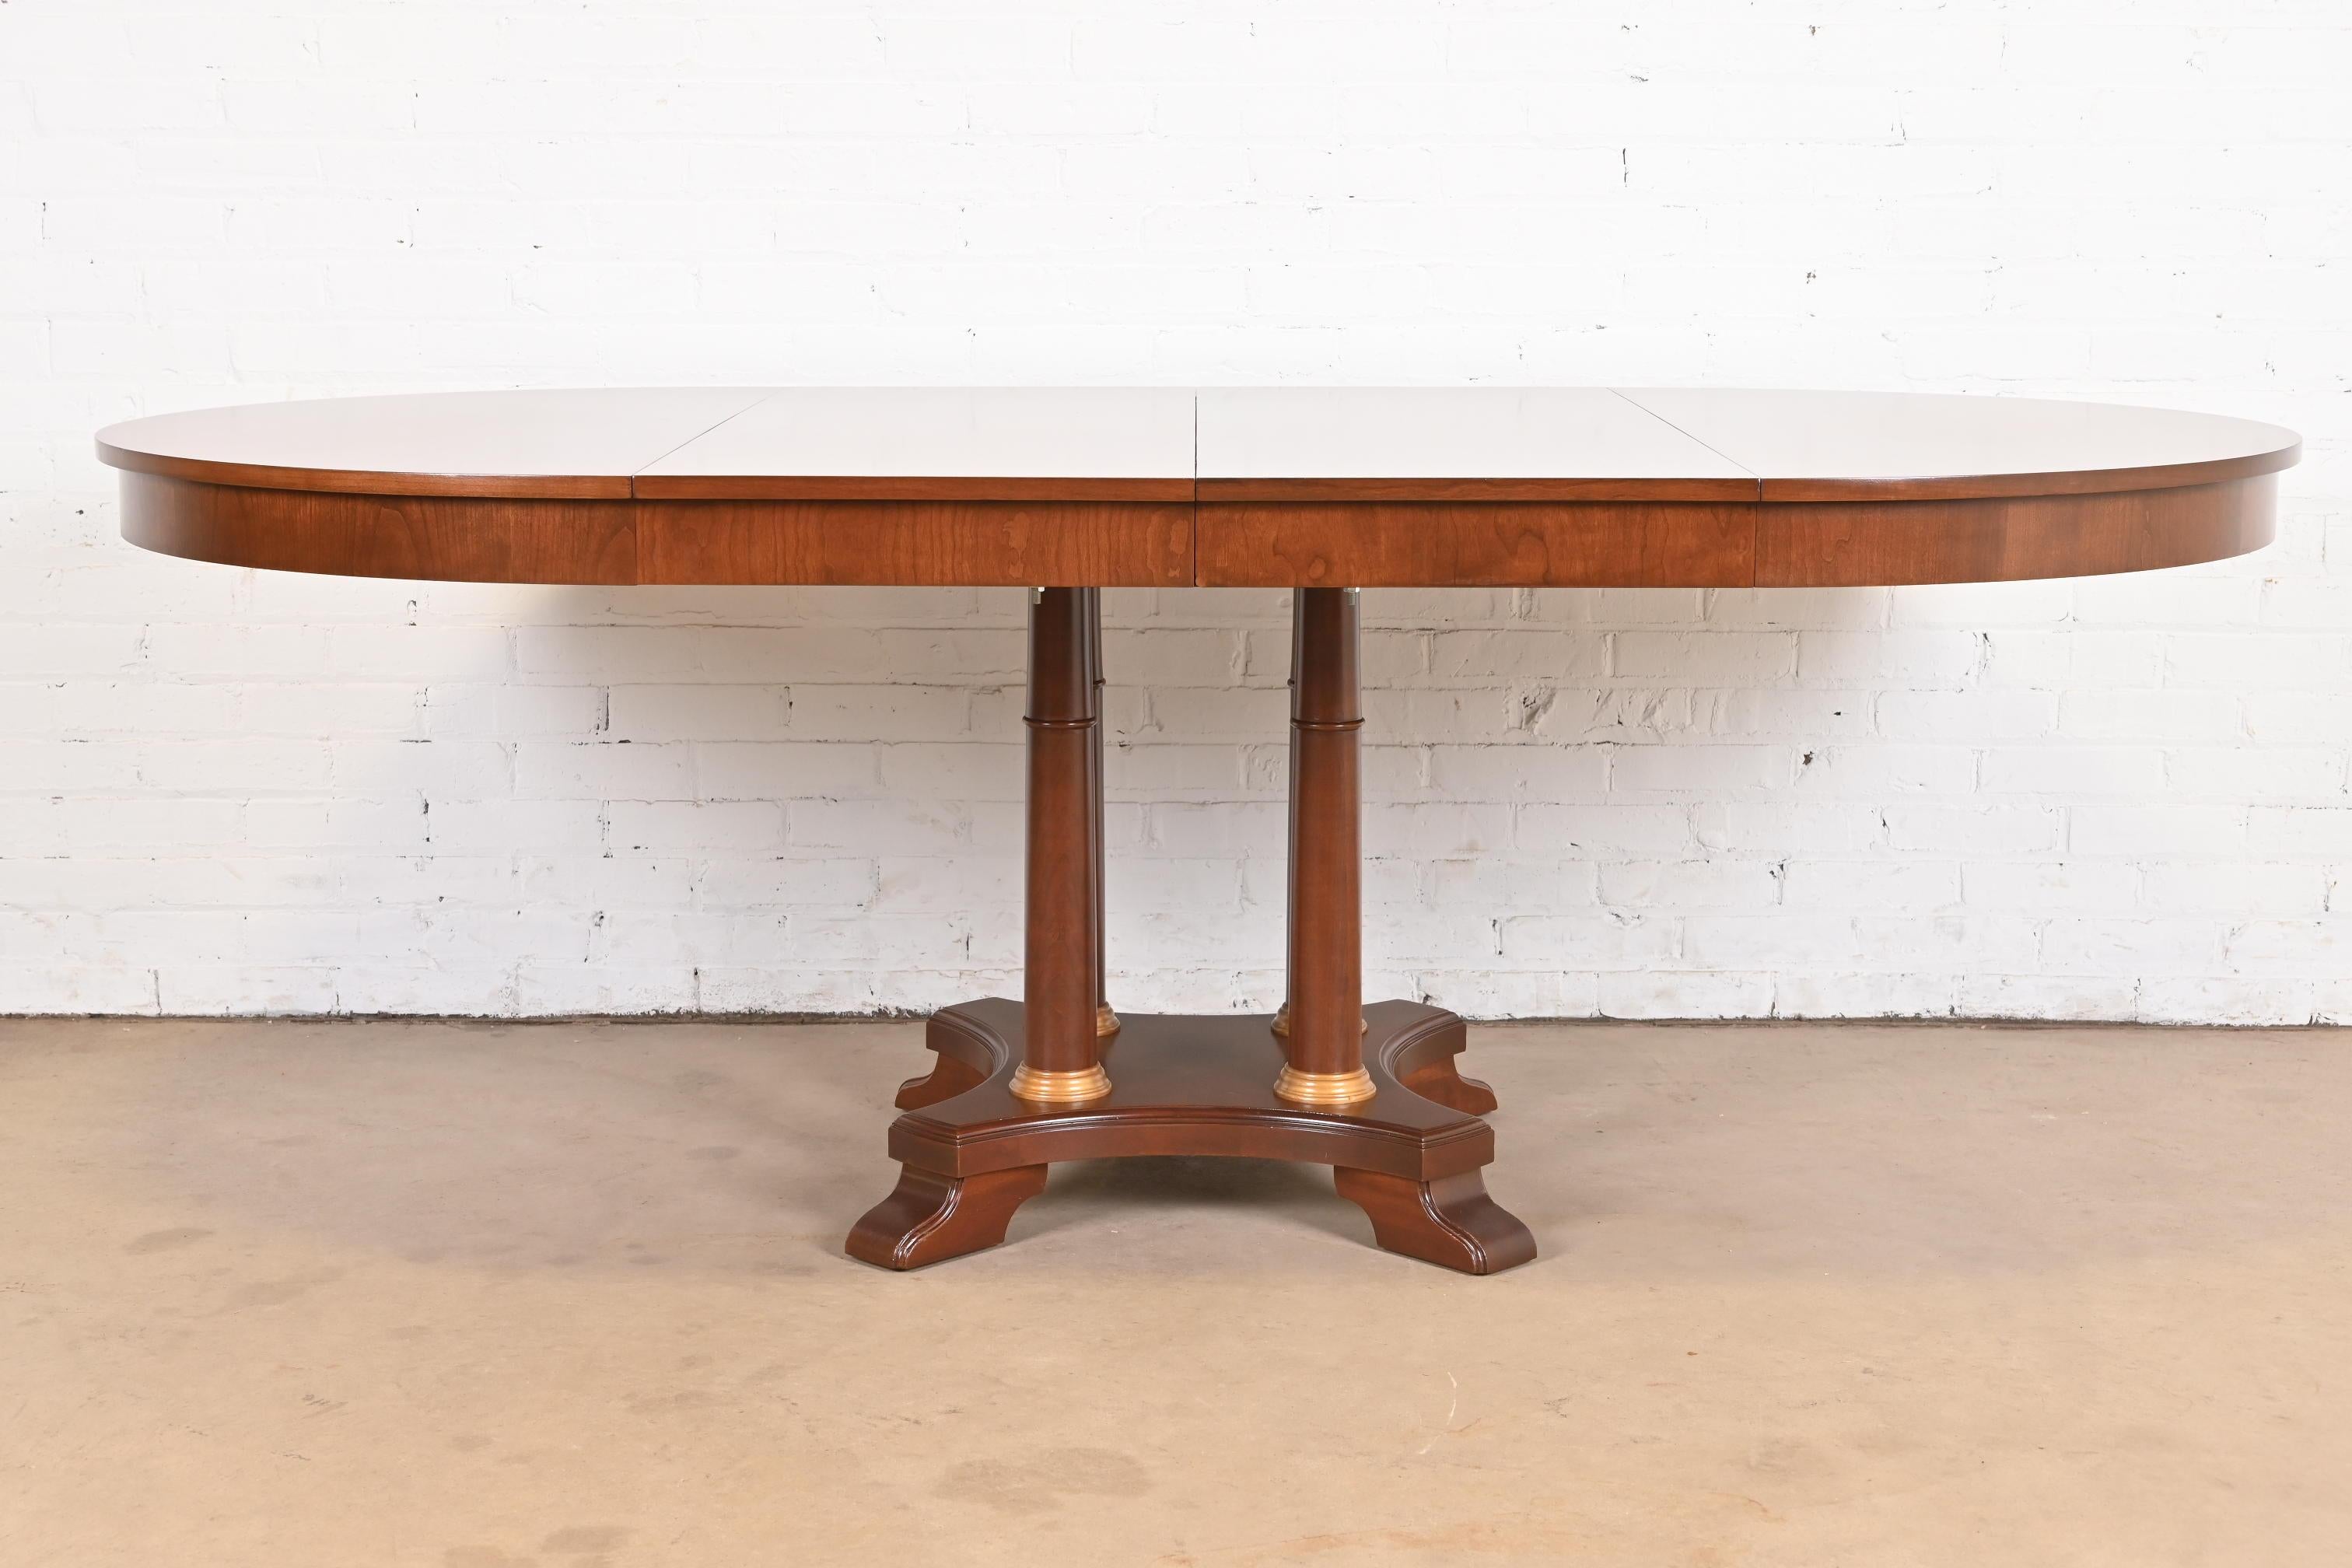 American Neoclassical or Empire Cherry Wood Pedestal Dining Table, Newly Refinished For Sale